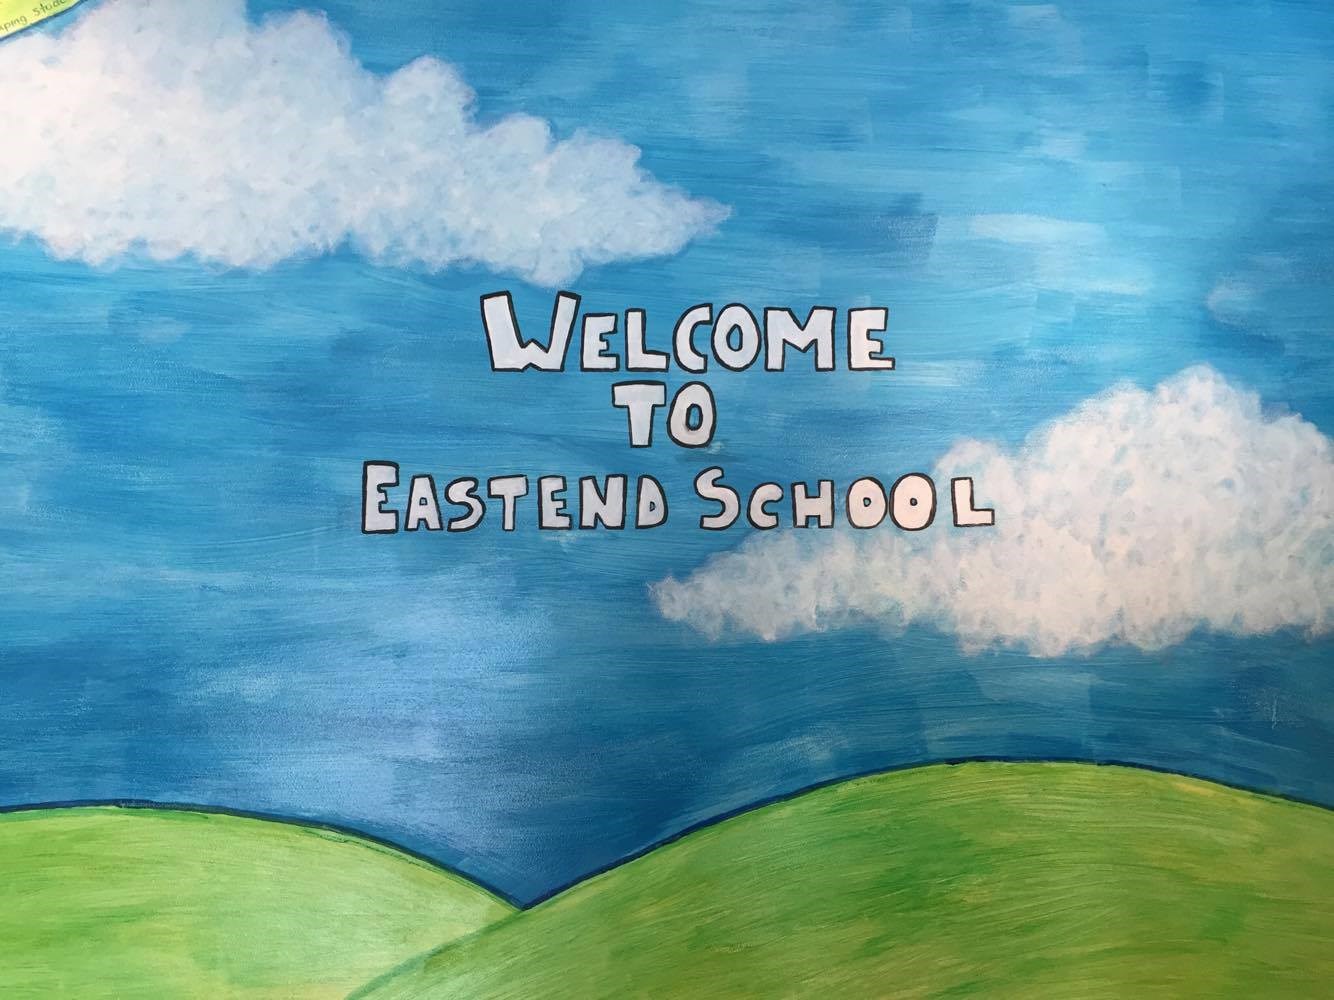 Welcome to Eastend School!